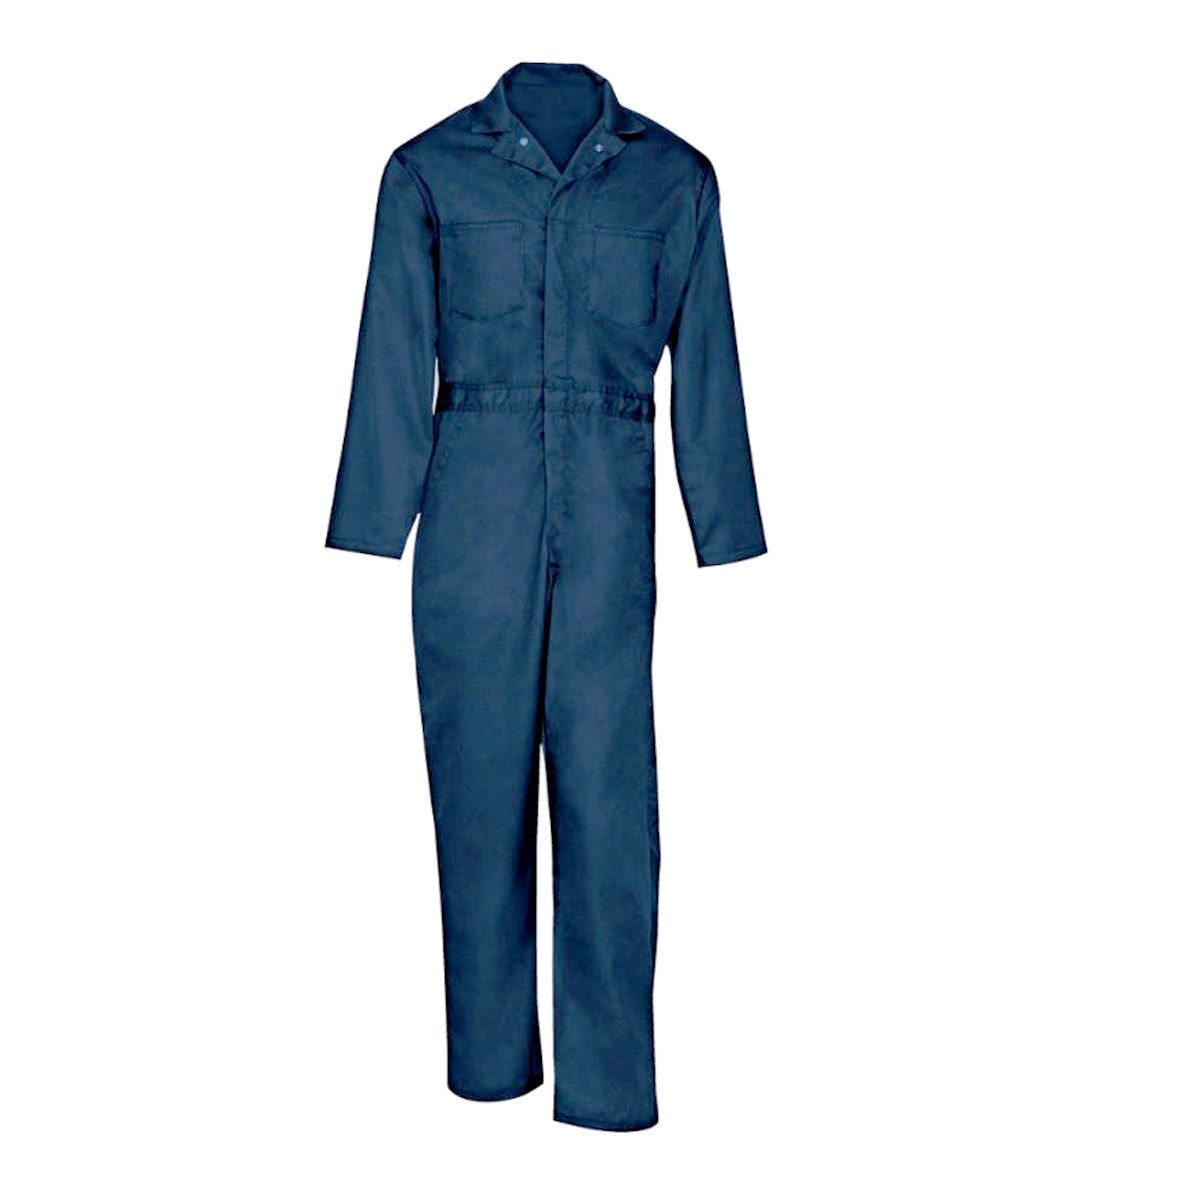 Chicago Protective Apparel Medium Navy Blue 8.5 Ounce Cotton Coveralls With Button Front Closure